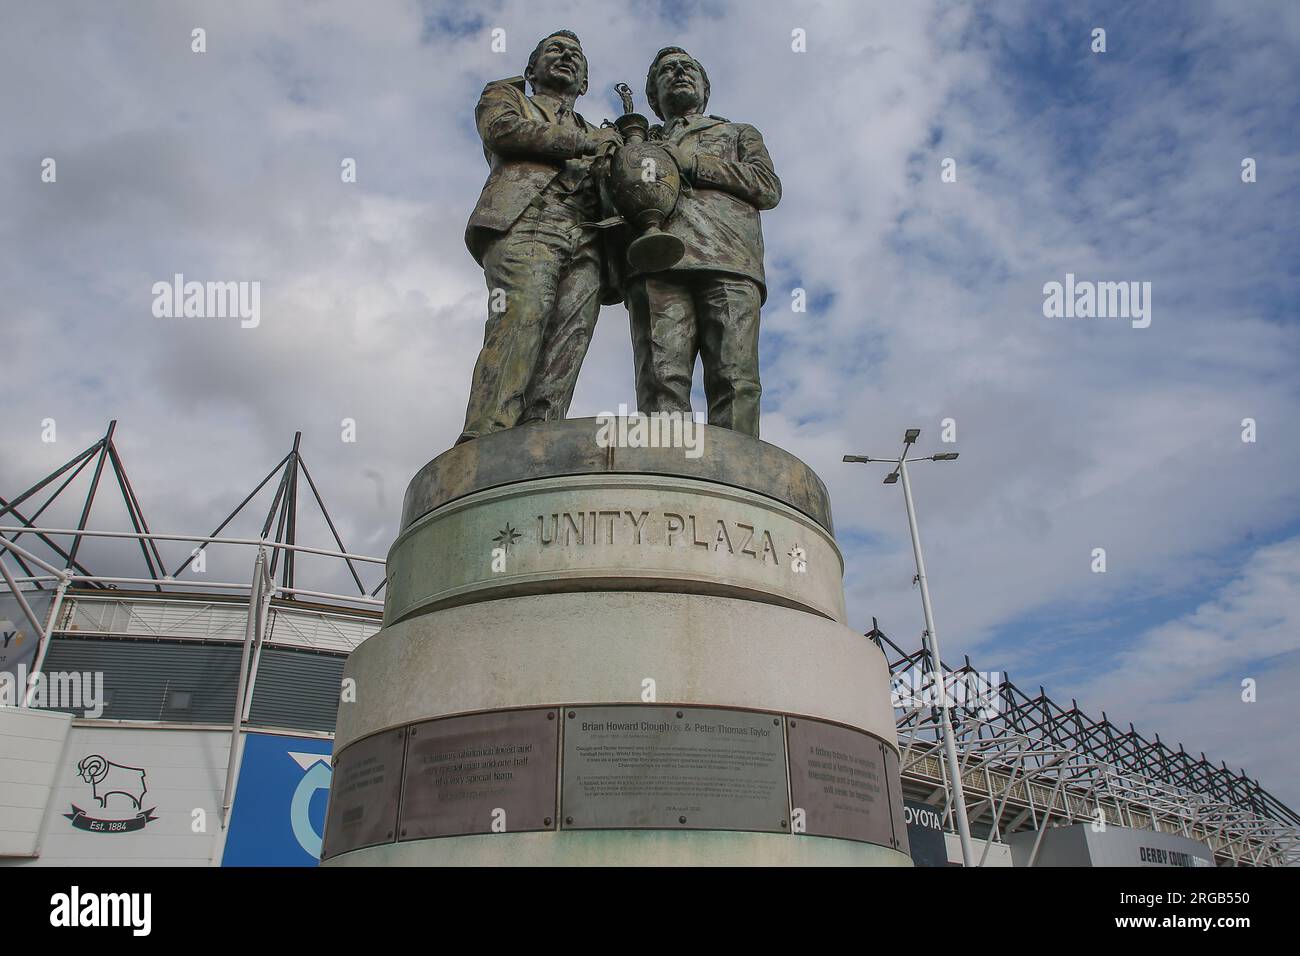 File:Clough and Taylor Statue Derby.JPG - Wikipedia